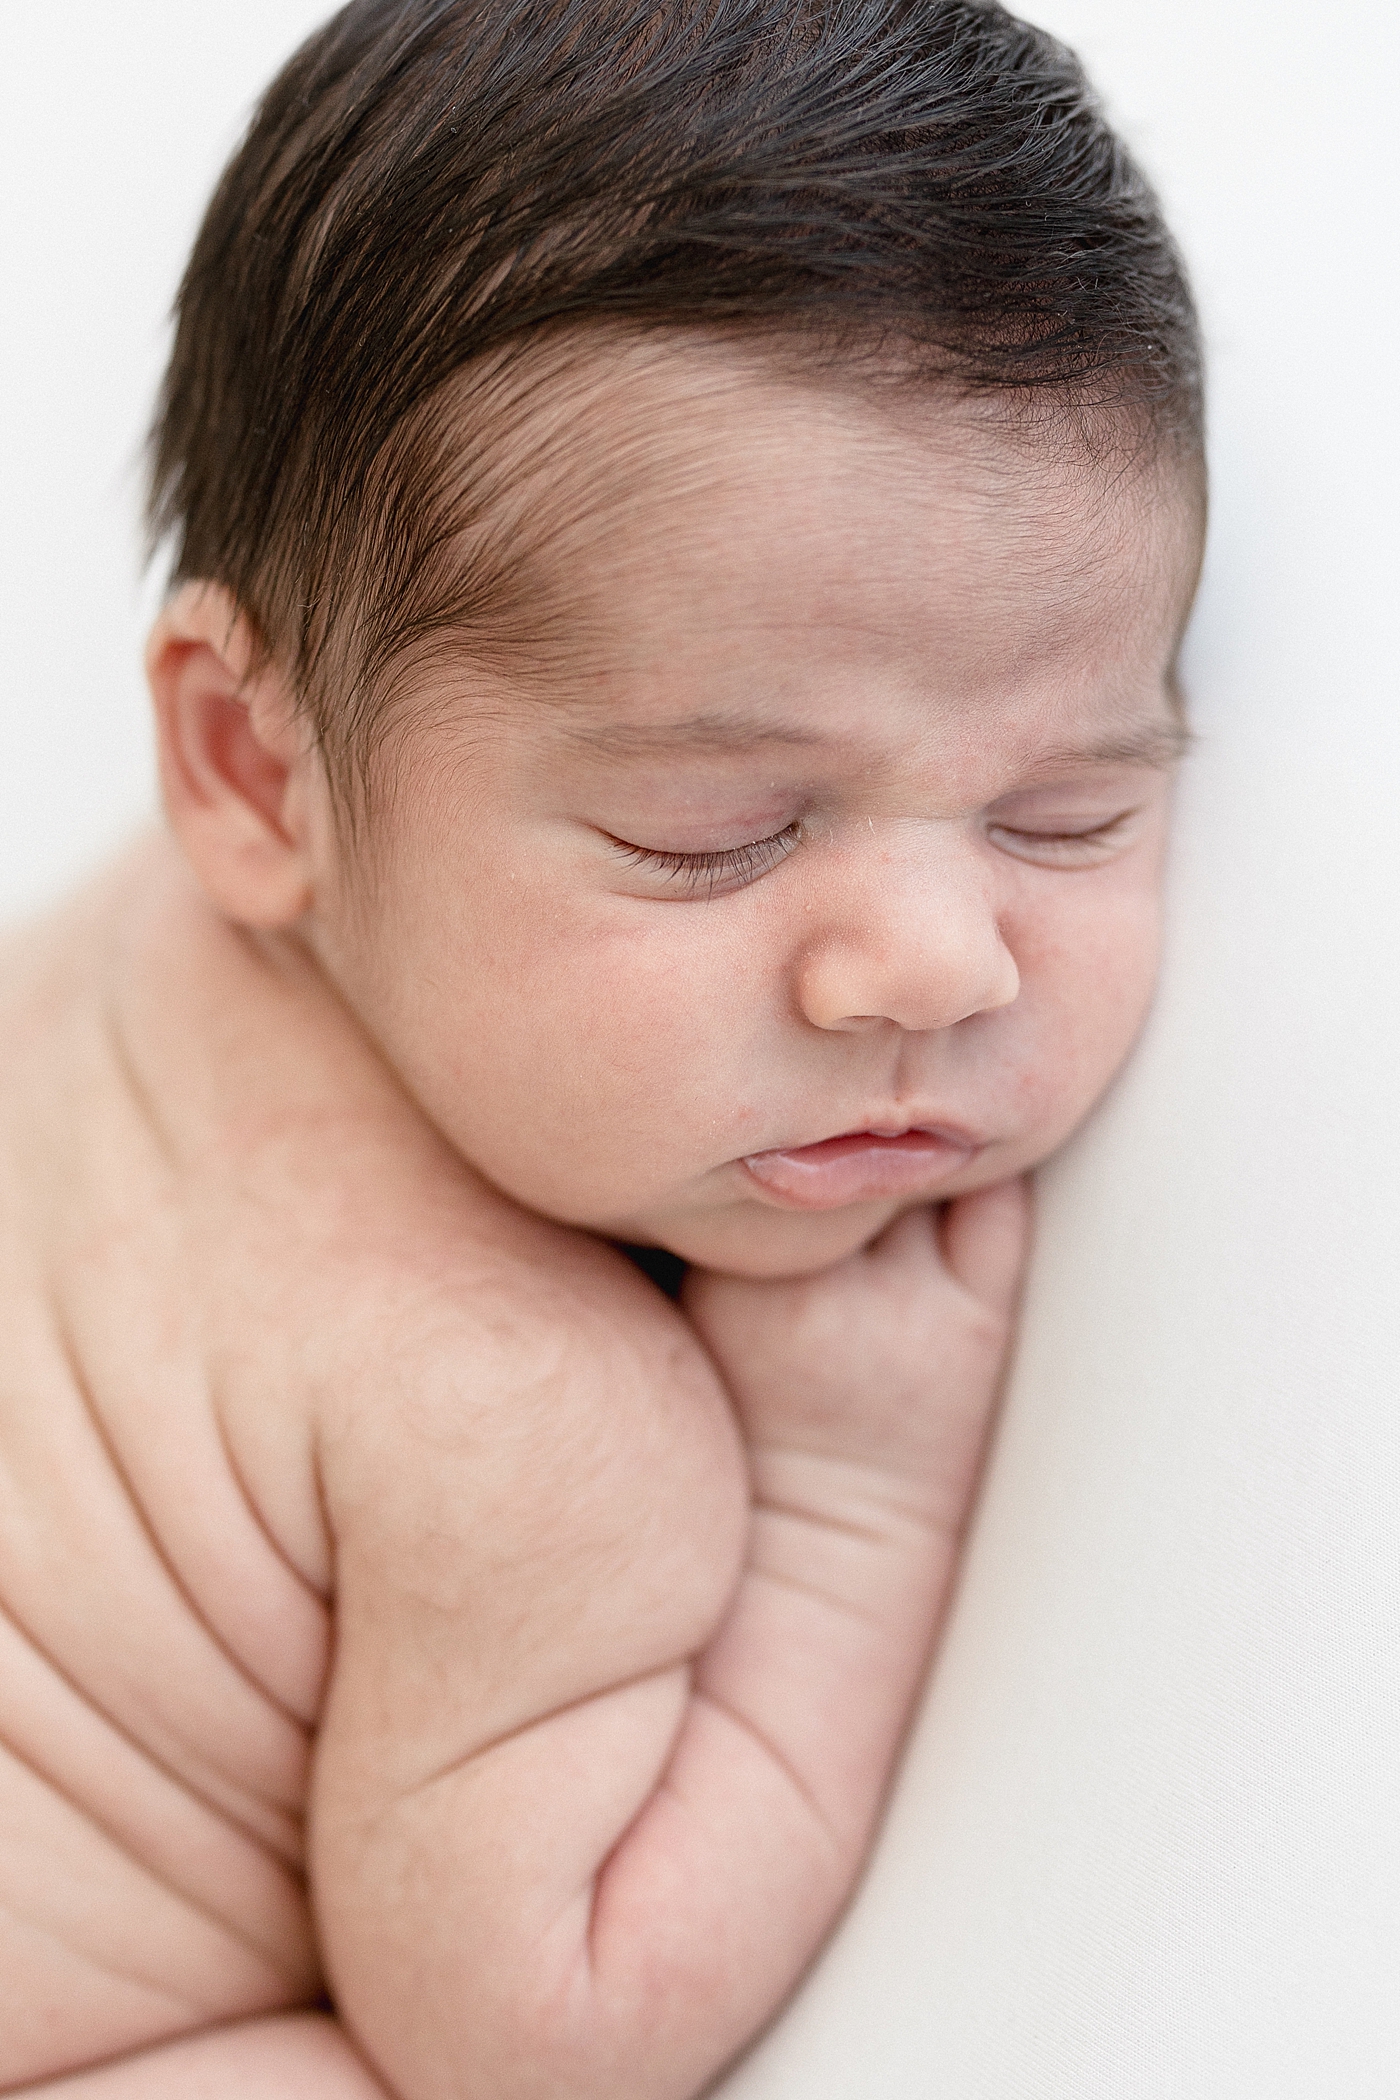 Baby laying on his stomach for newborn photos. Photo by Brittany Elise Photography.